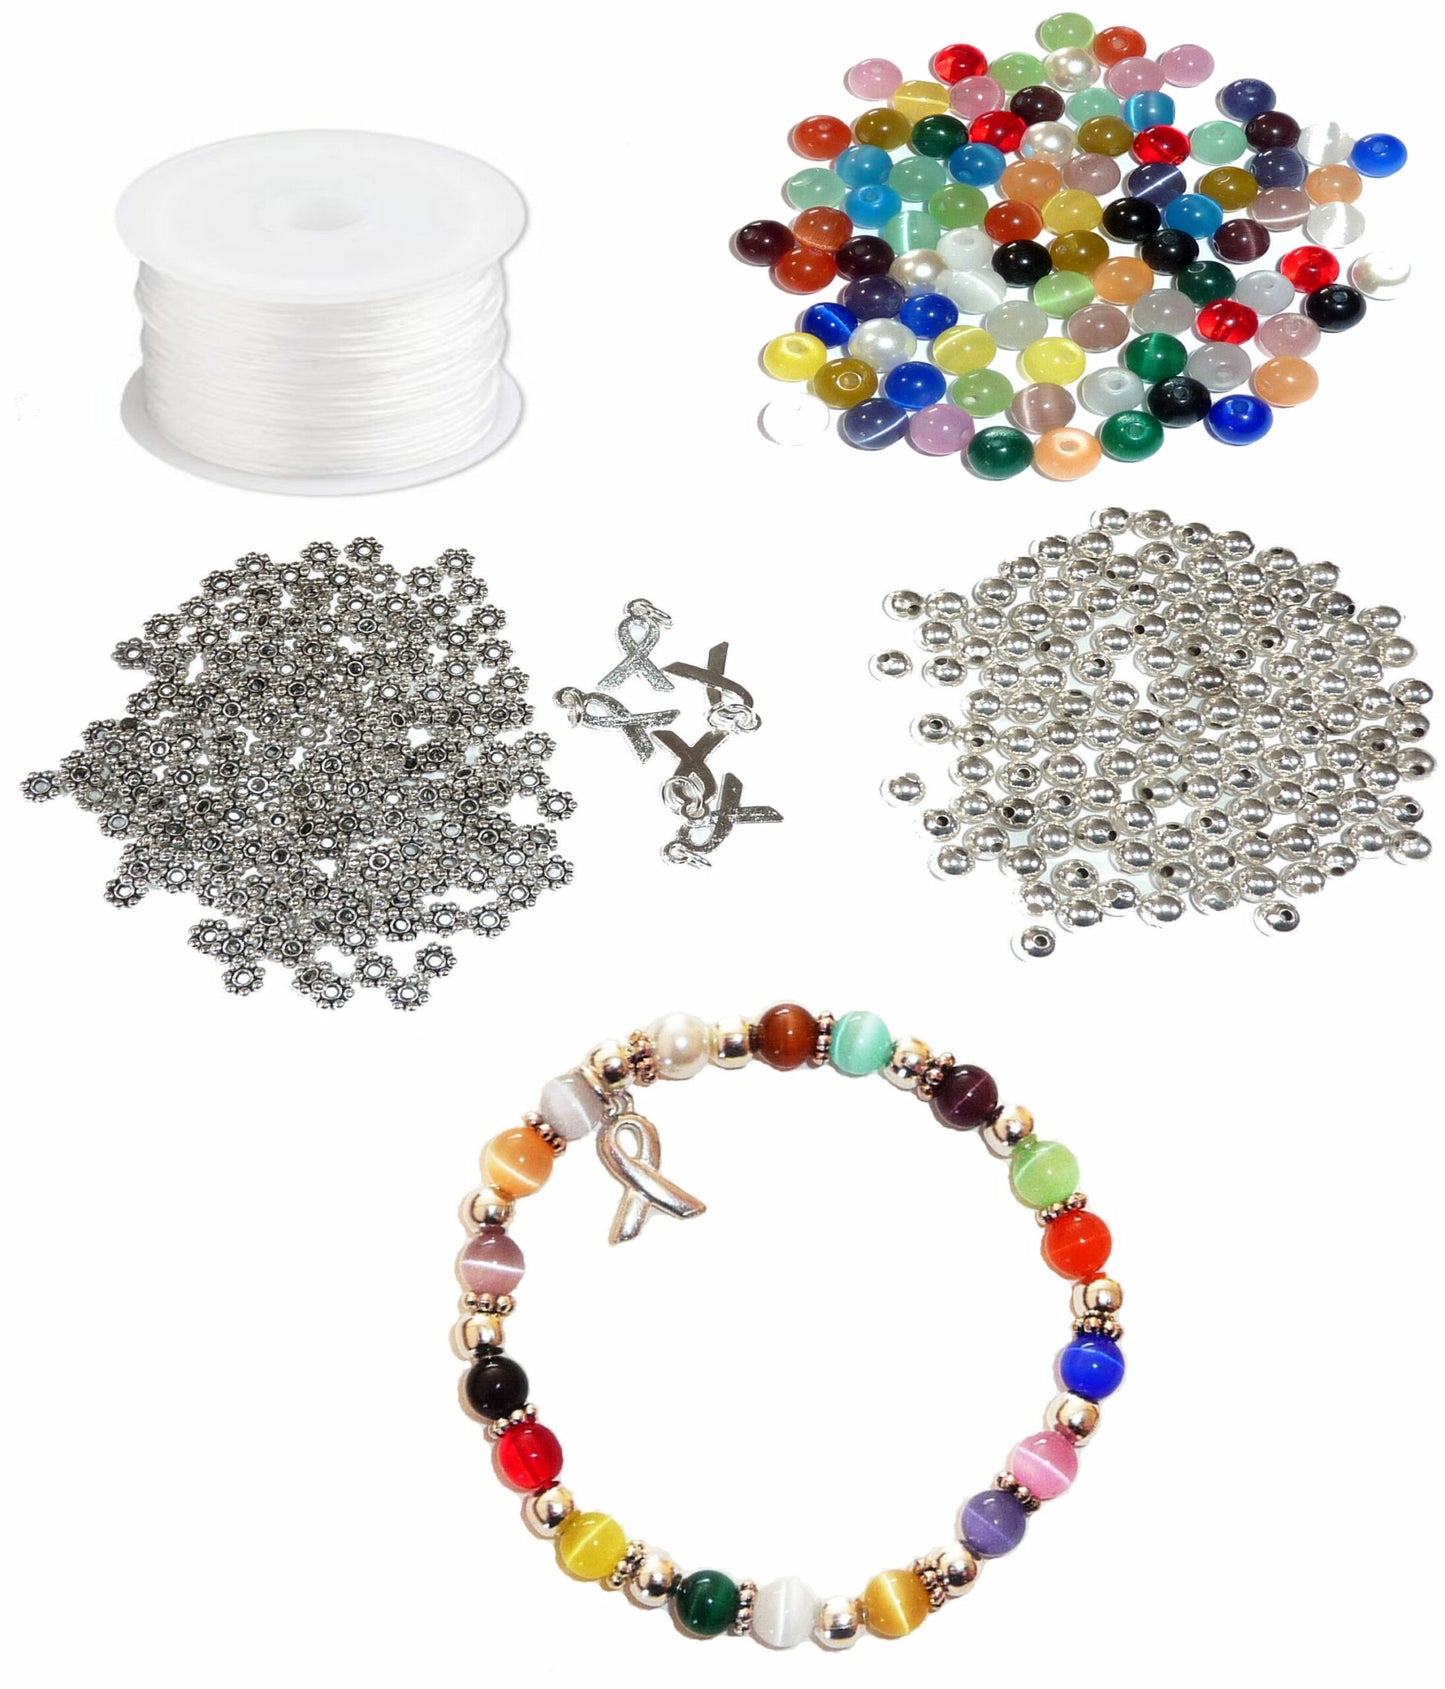 DIY Kit, Everything You Need to Make Cancer Awareness Bracelets, Uses Stretch Cord, Great for Fundraising Makes 5 - Multi Colored